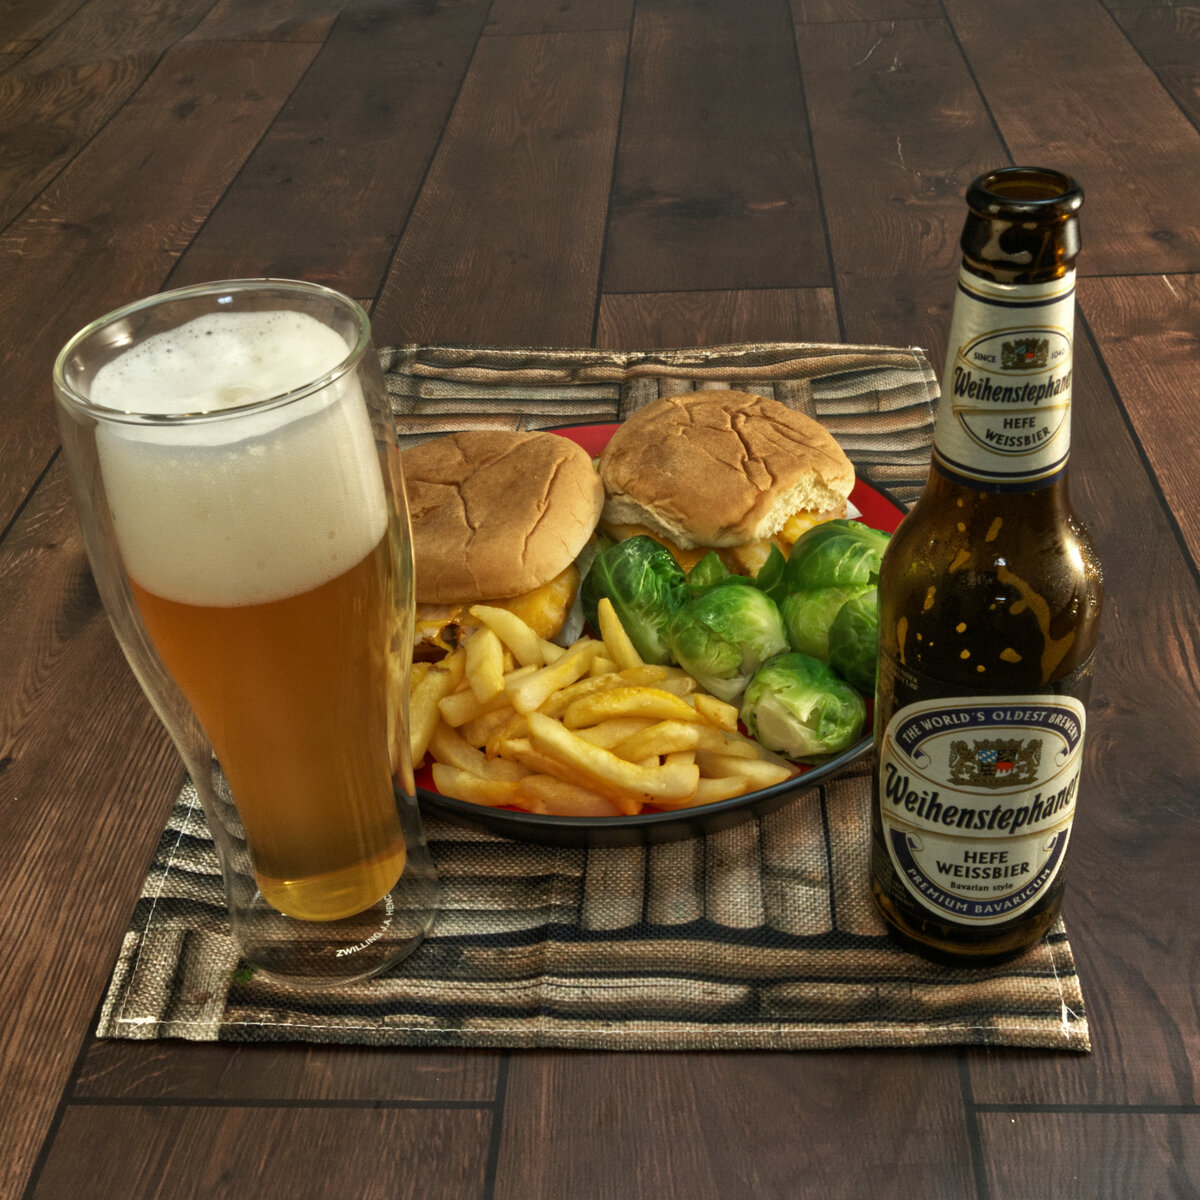 Turkey Sandwiches, Brussel Sprouts and Fries with Hefe Weissbier